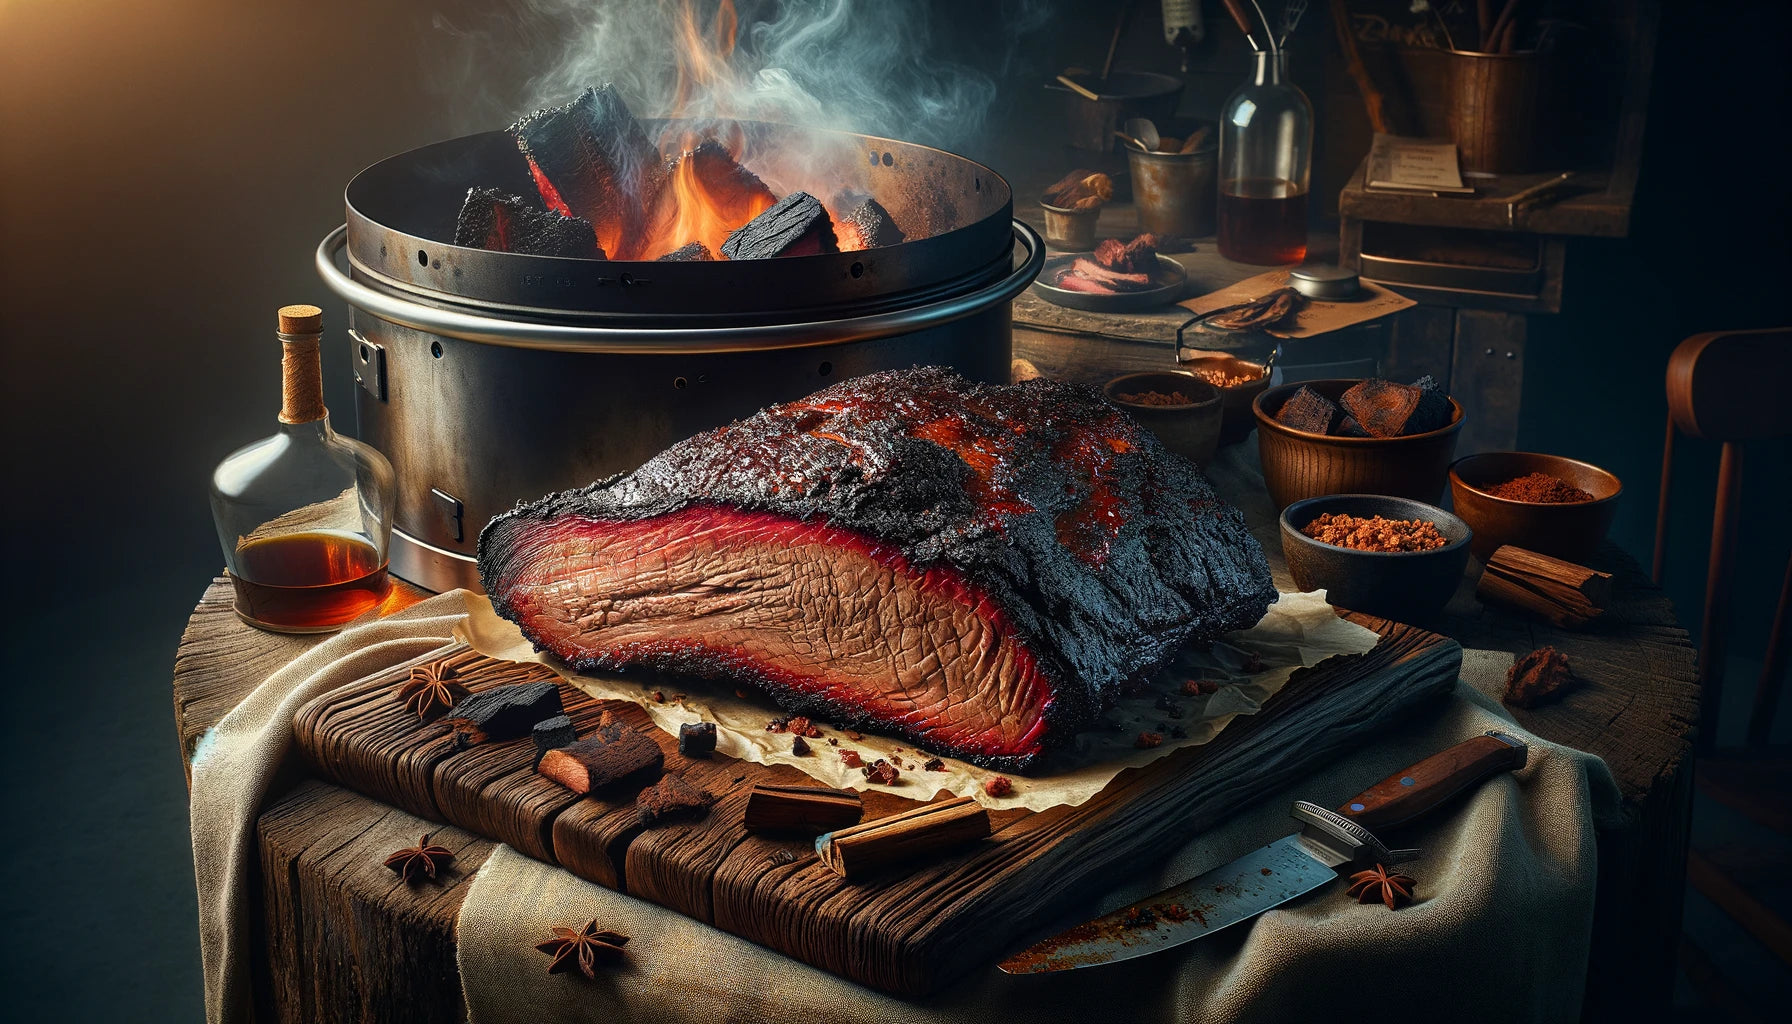 Smoked Brisket, emphasizing the innovative smoking technique and the rich, flavorful result of open fire smoking